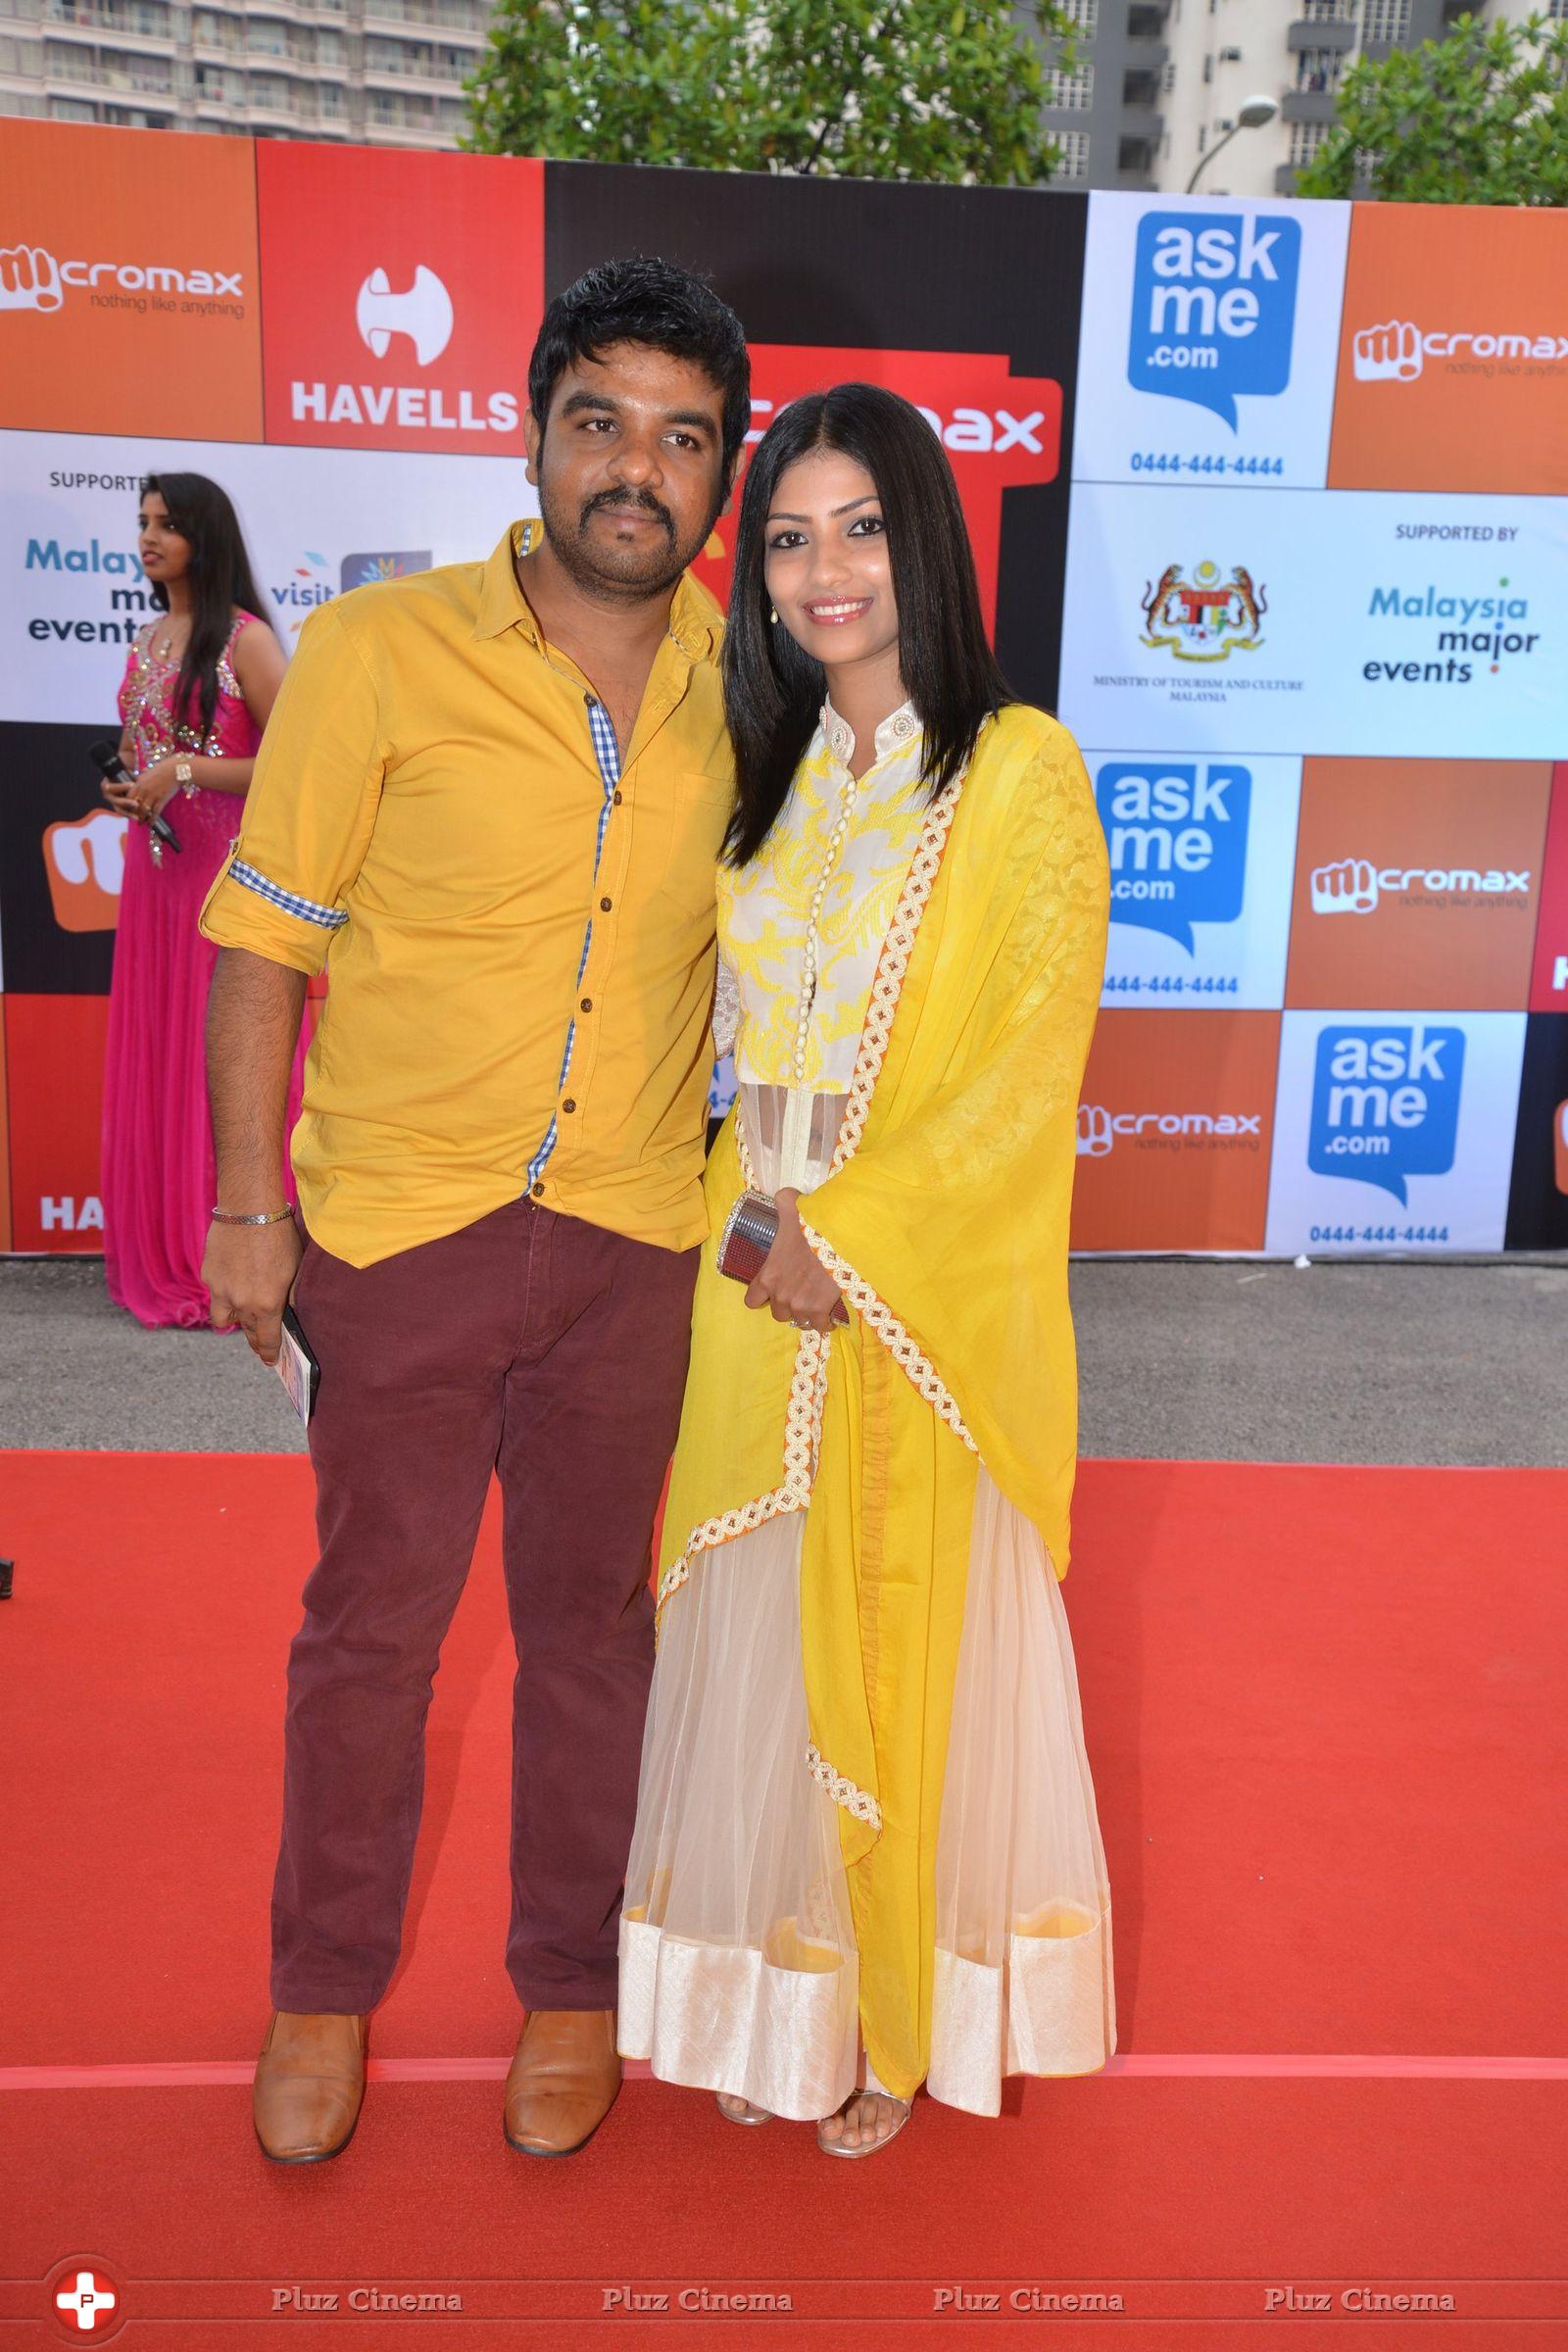 Micromax SIIMA Awards in Malaysia Photos | Picture 822786